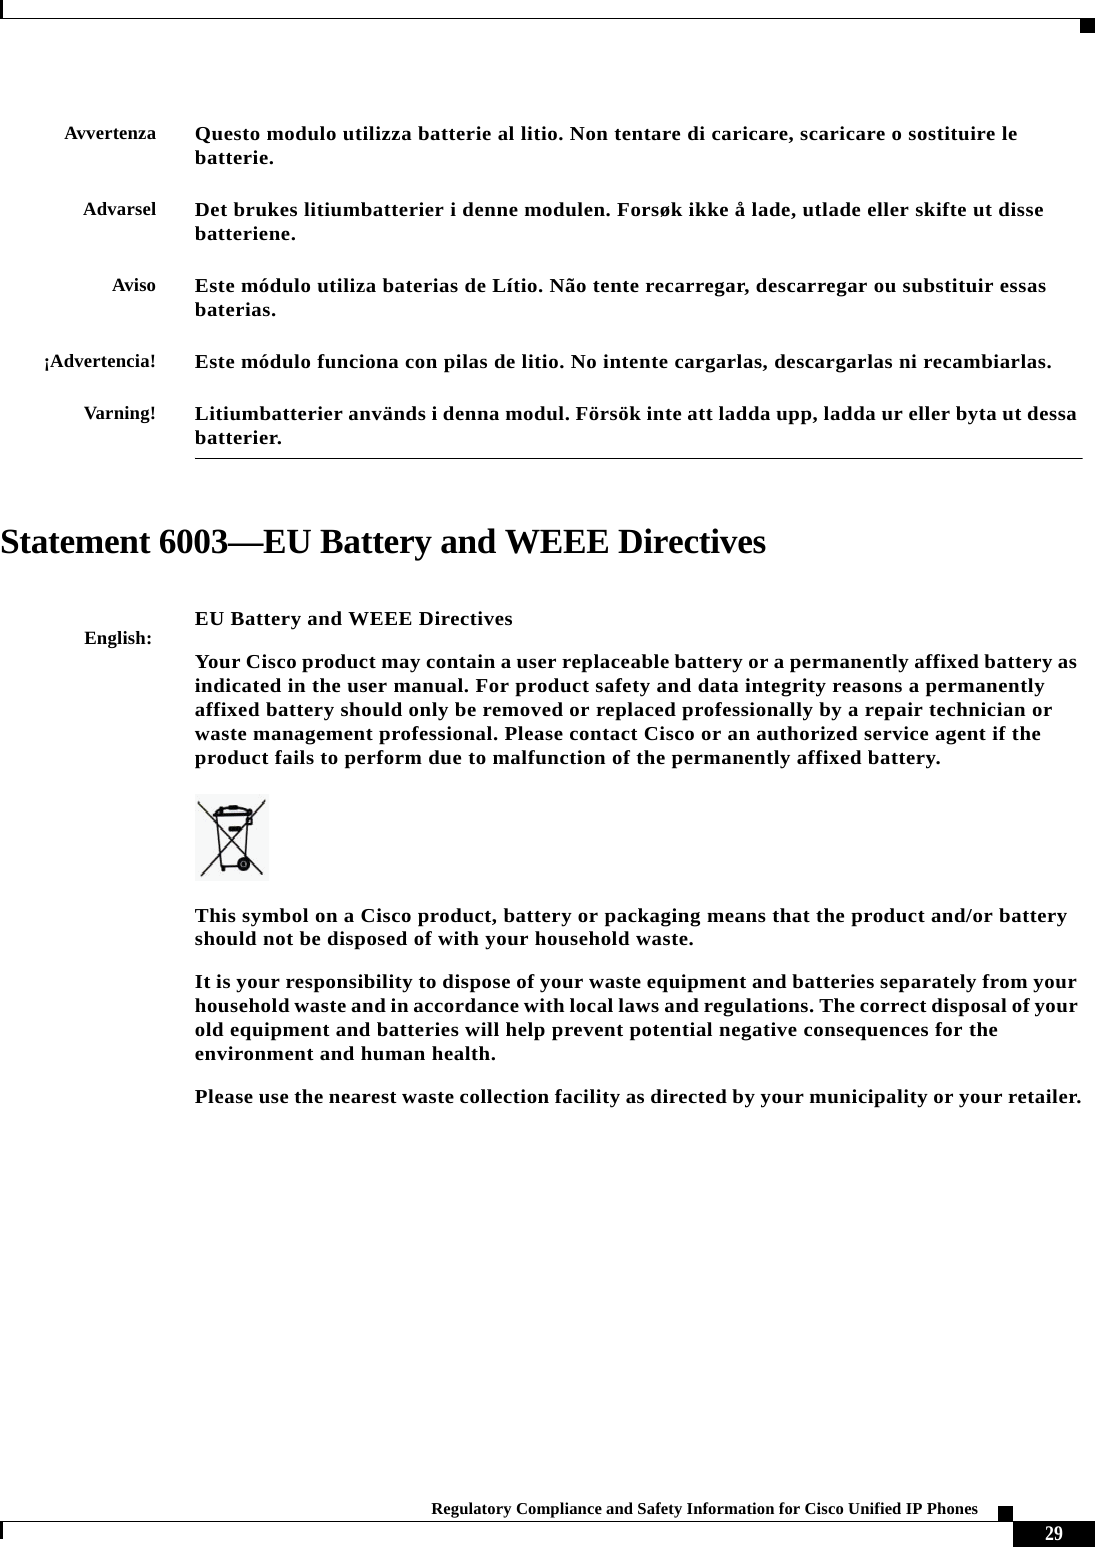  29Regulatory Compliance and Safety Information for Cisco Unified IP Phones Statement 6003—EU Battery and WEEE DirectivesAvvertenzaQuesto modulo utilizza batterie al litio. Non tentare di caricare, scaricare o sostituire le batterie.AdvarselDet brukes litiumbatterier i denne modulen. Forsøk ikke å lade, utlade eller skifte ut disse batteriene. AvisoEste módulo utiliza baterias de Lítio. Não tente recarregar, descarregar ou substituir essas baterias.¡Advertencia!Este módulo funciona con pilas de litio. No intente cargarlas, descargarlas ni recambiarlas.Varning!Litiumbatterier används i denna modul. Försök inte att ladda upp, ladda ur eller byta ut dessa batterier.English:EU Battery and WEEE DirectivesYour Cisco product may contain a user replaceable battery or a permanently affixed battery as indicated in the user manual. For product safety and data integrity reasons a permanently affixed battery should only be removed or replaced professionally by a repair technician or waste management professional. Please contact Cisco or an authorized service agent if the product fails to perform due to malfunction of the permanently affixed battery.This symbol on a Cisco product, battery or packaging means that the product and/or battery should not be disposed of with your household waste.It is your responsibility to dispose of your waste equipment and batteries separately from your household waste and in accordance with local laws and regulations. The correct disposal of your old equipment and batteries will help prevent potential negative consequences for the environment and human health.Please use the nearest waste collection facility as directed by your municipality or your retailer.